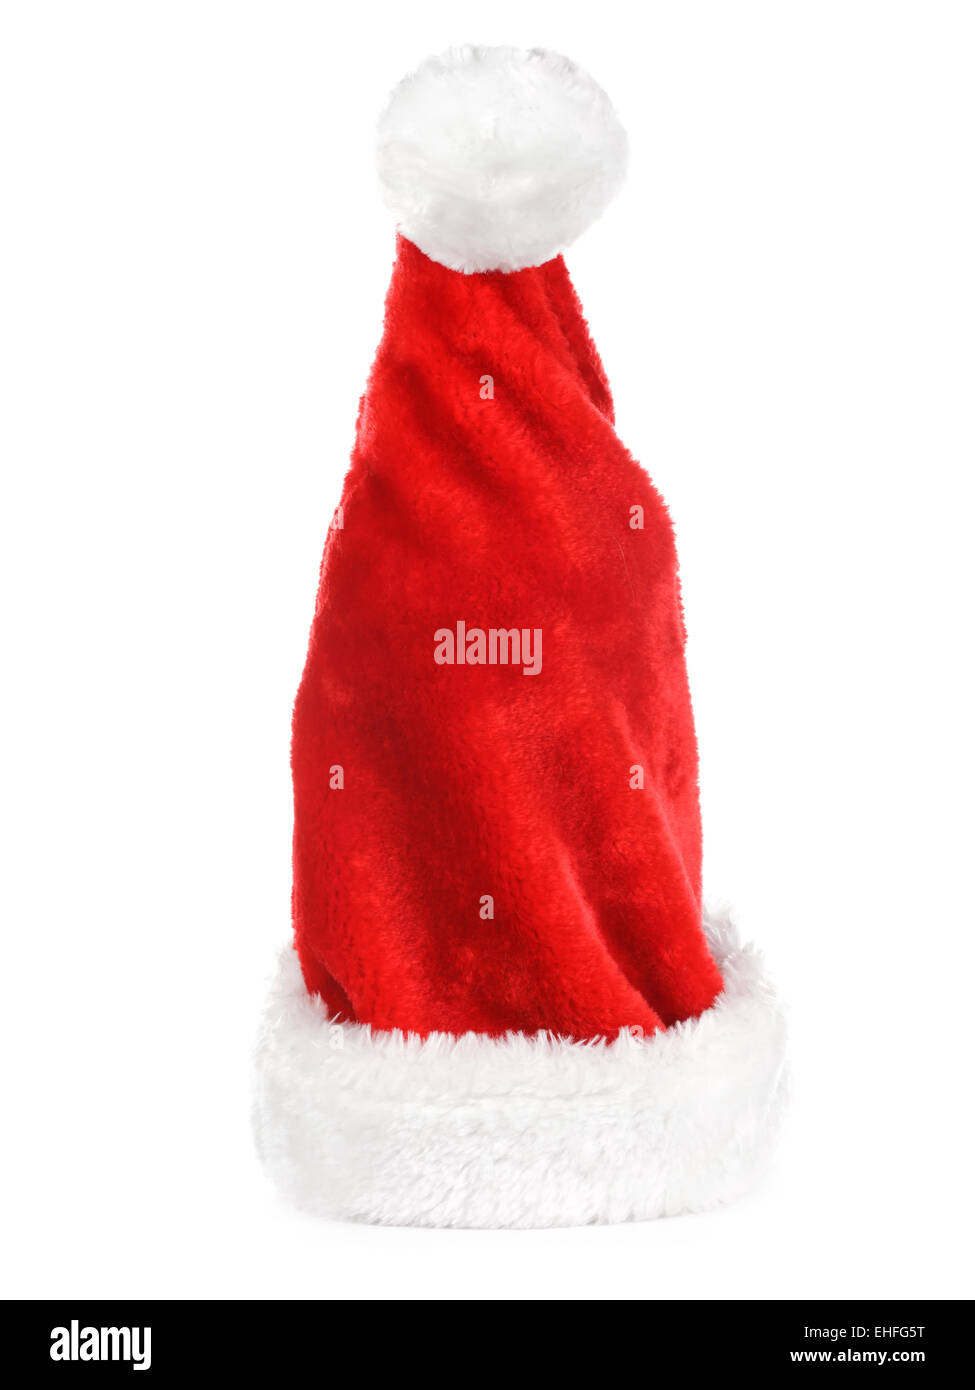 Calendar with santa claus Cut Out Stock Images & Pictures - Page 2 - Alamy